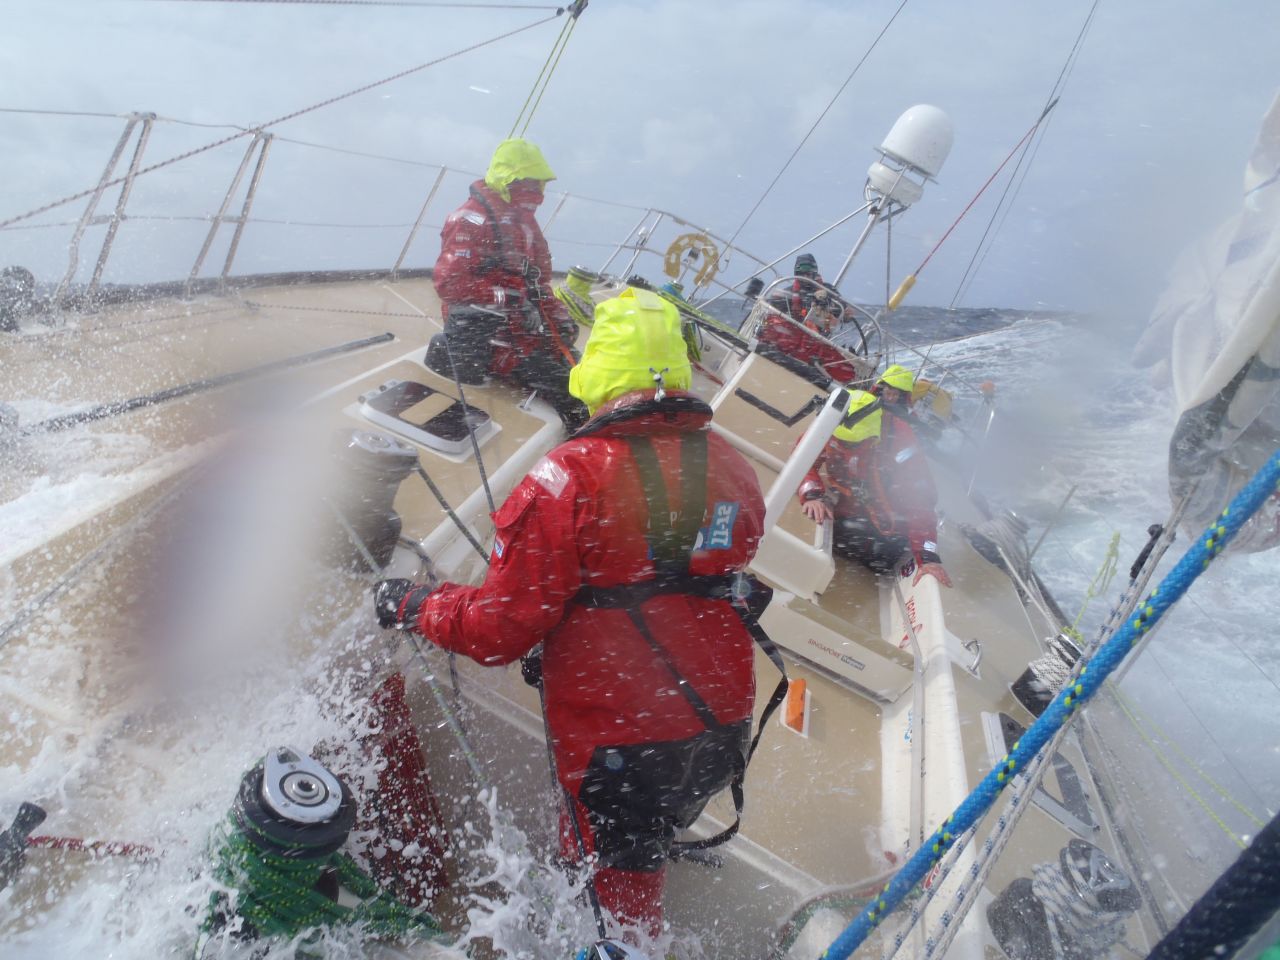 She decided to take part in the eighth and final leg of the race -- crossing the Atlantic Ocean. The journey was a grueling affair plagued by tropical storms and rough seas. Laymond described it as her "toughest ever challenge." 